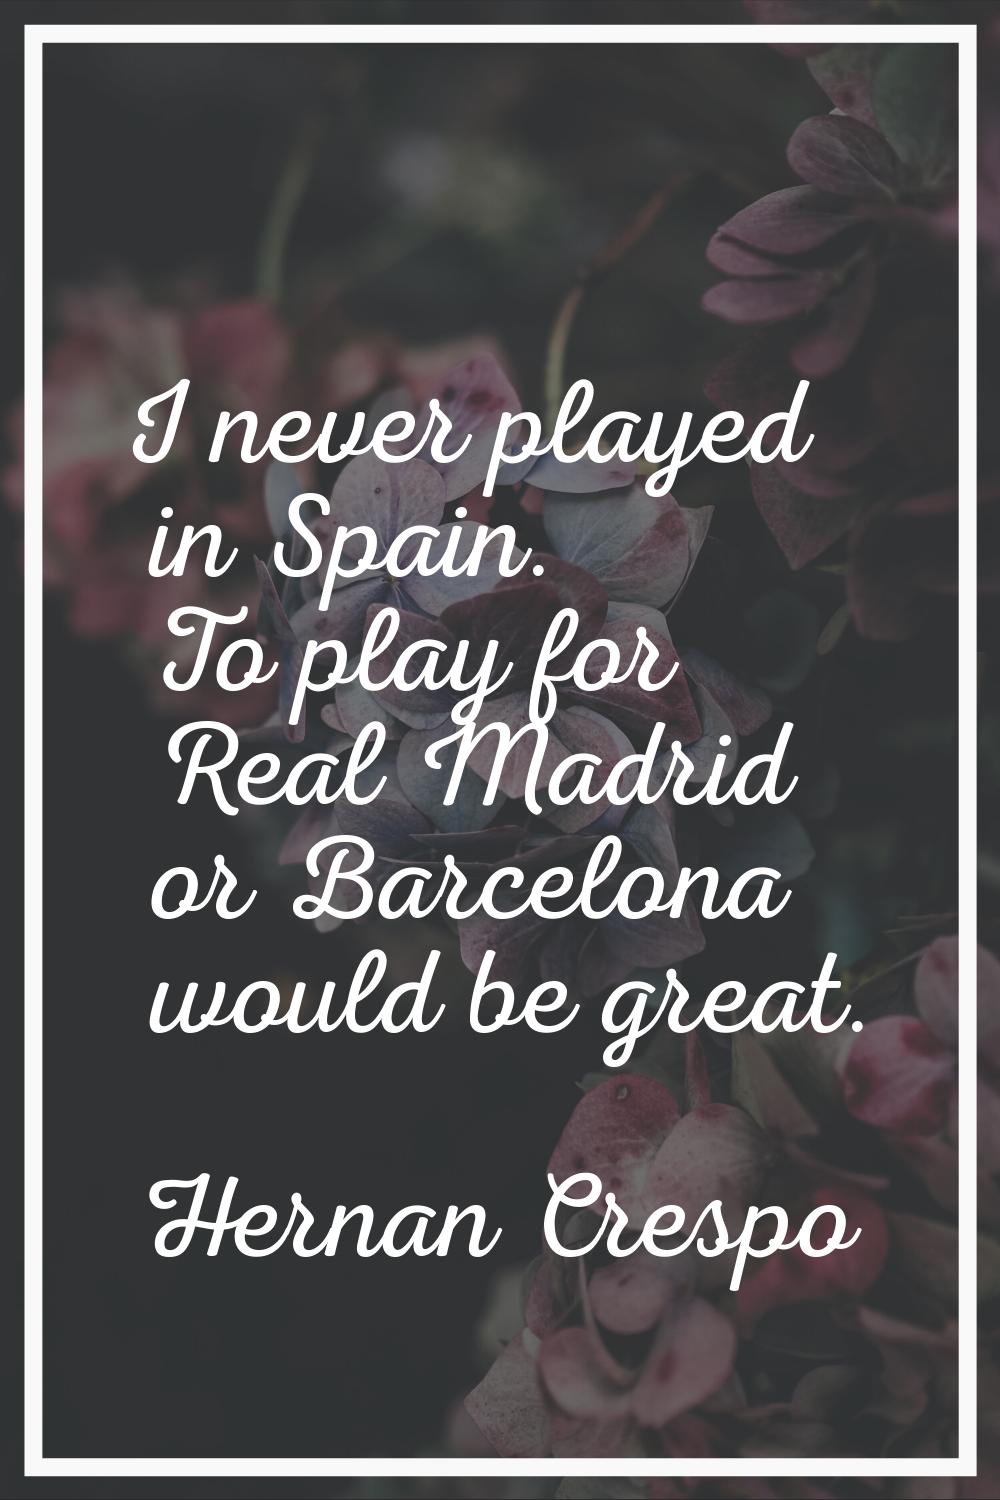 I never played in Spain. To play for Real Madrid or Barcelona would be great.